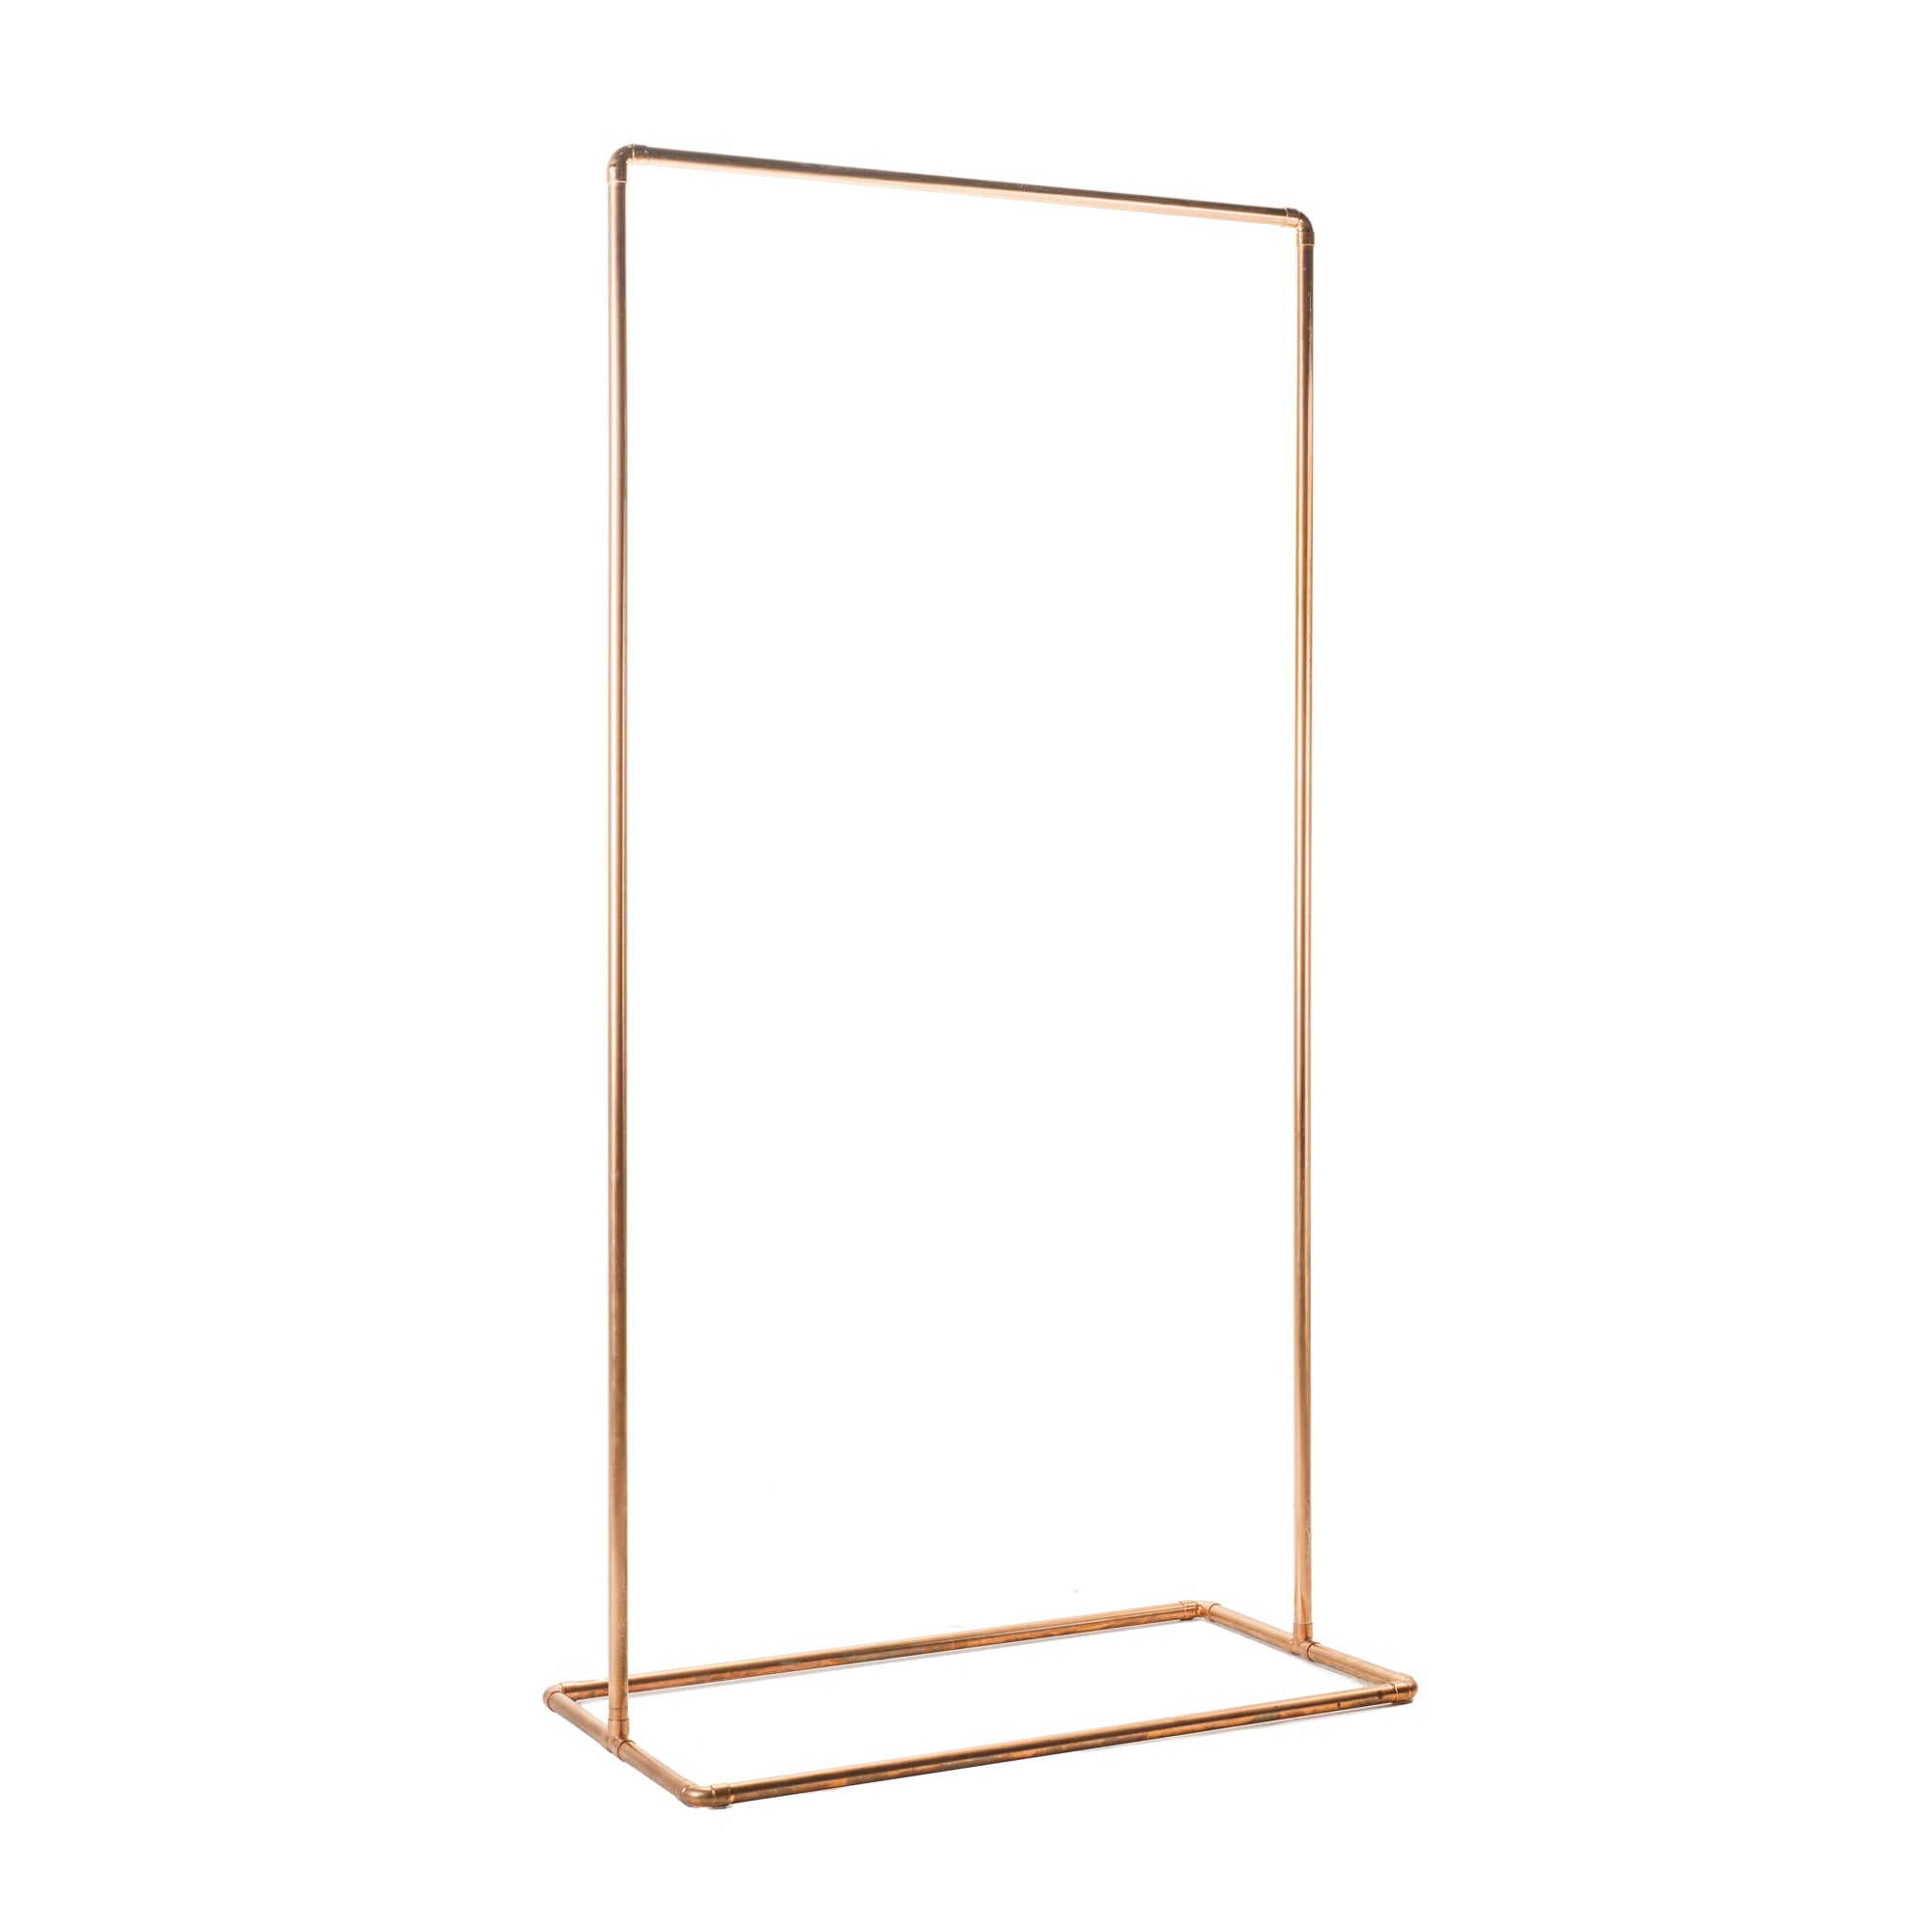 Copper frame for hire | For Love & Living Gold Coast Weddings & Events